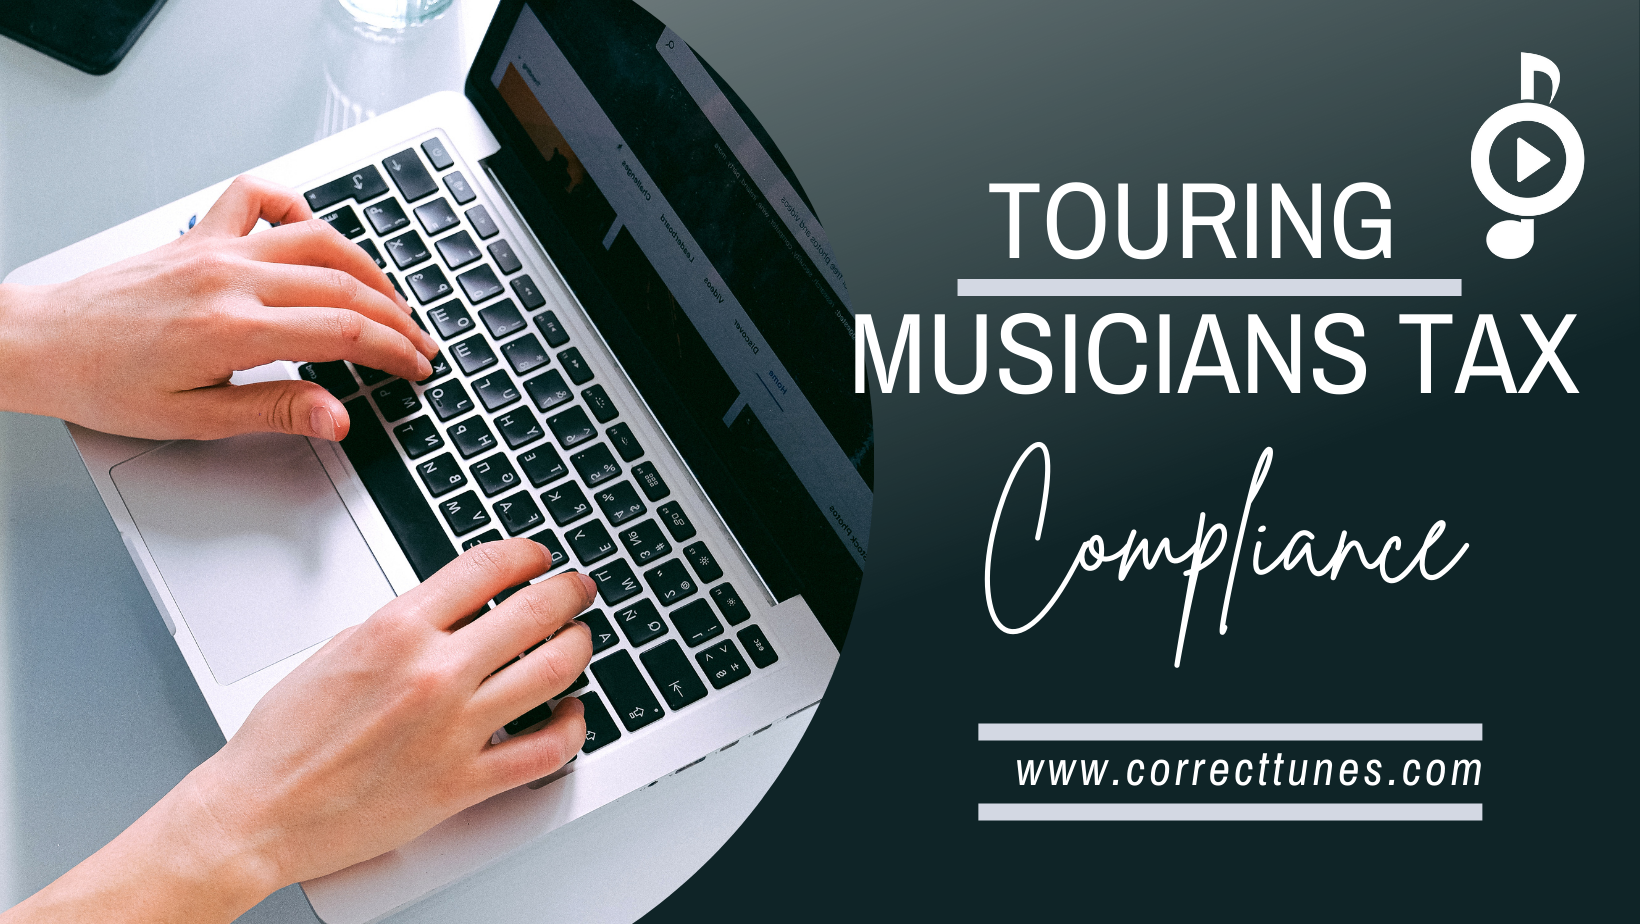 Tax Compliance for Touring Musicians